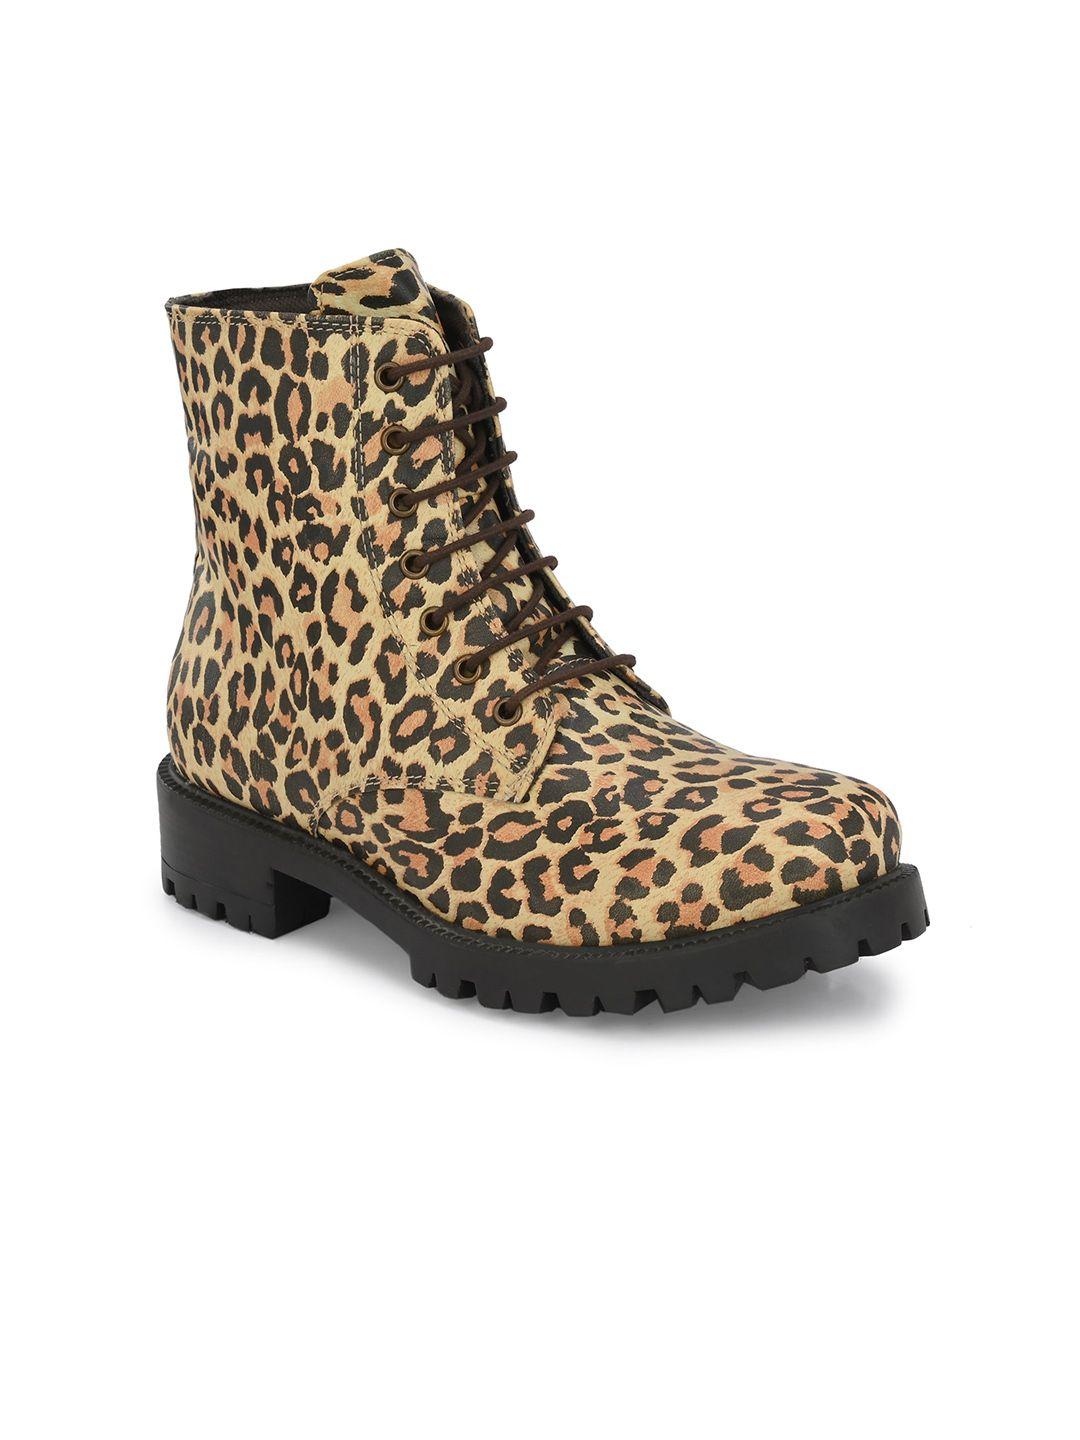 carlo romano women animal printed leather high ankle boots